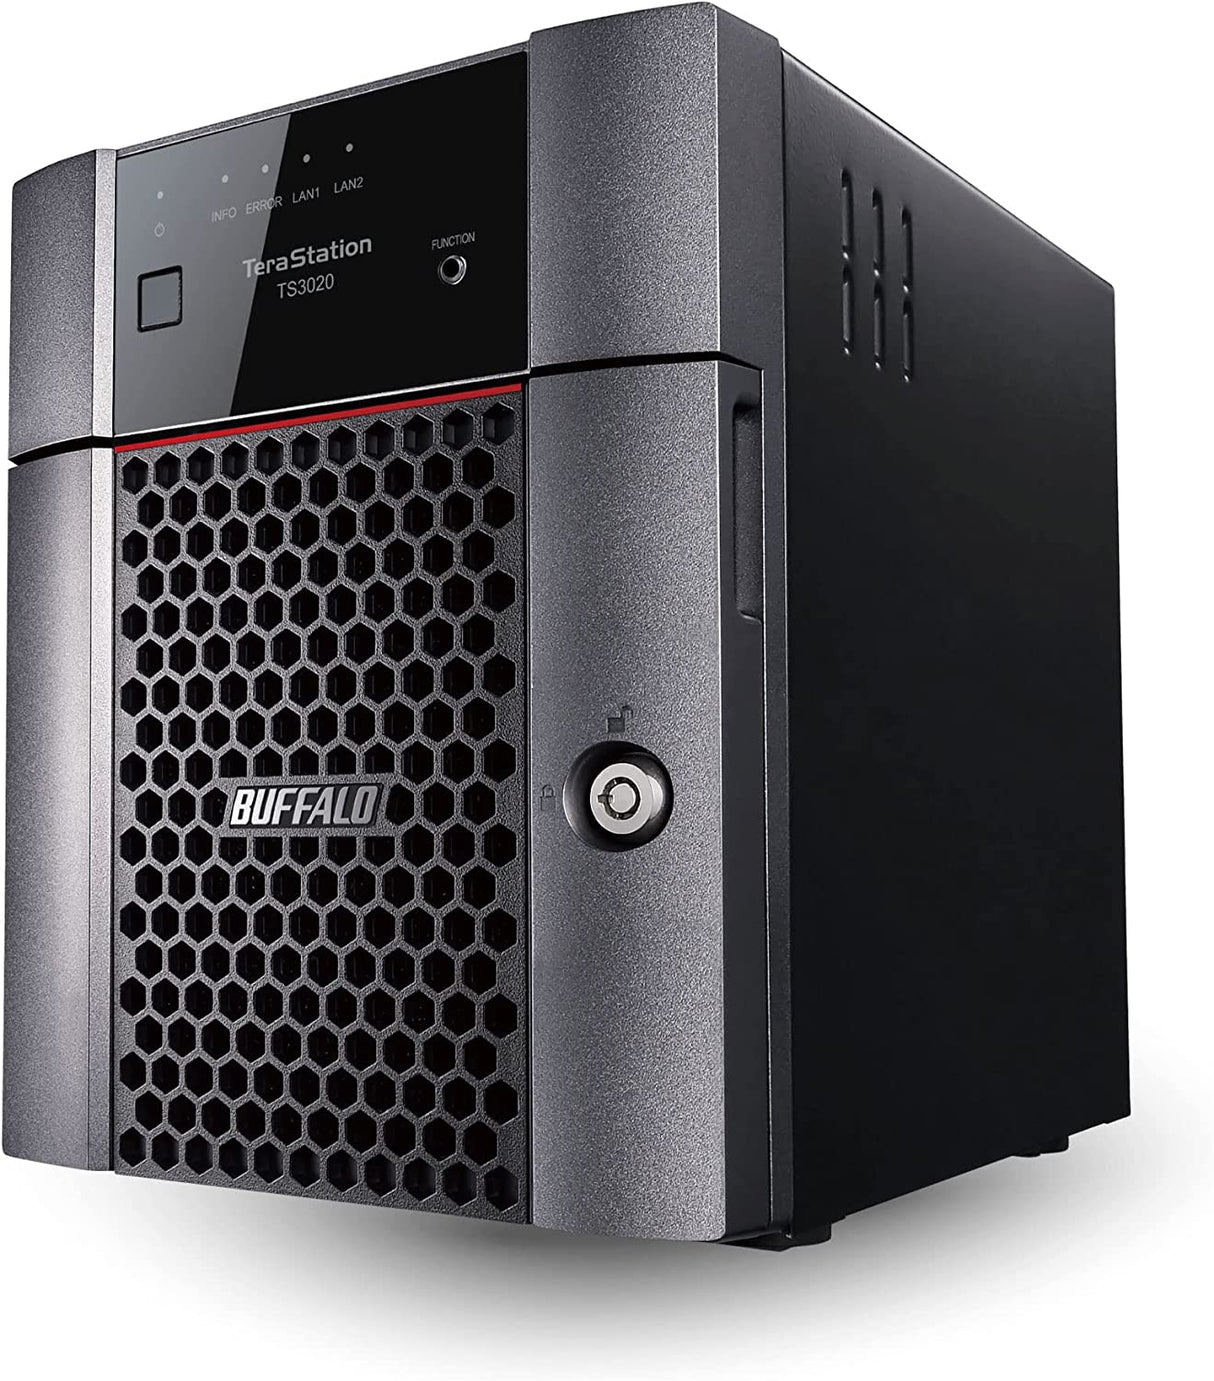 BUFFALO TeraStation 3420DN 4-Bay Desktop NAS 4TB (2x2TB) with HDD NAS Hard Drives Included 2.5GBE / Computer Network Attached Storage / Private Cloud / NAS Storage/ Network Storage / File Server 4 TB (2 x 2TB) TeraStation 3420DN Desktop NAS 4 Drive Bays